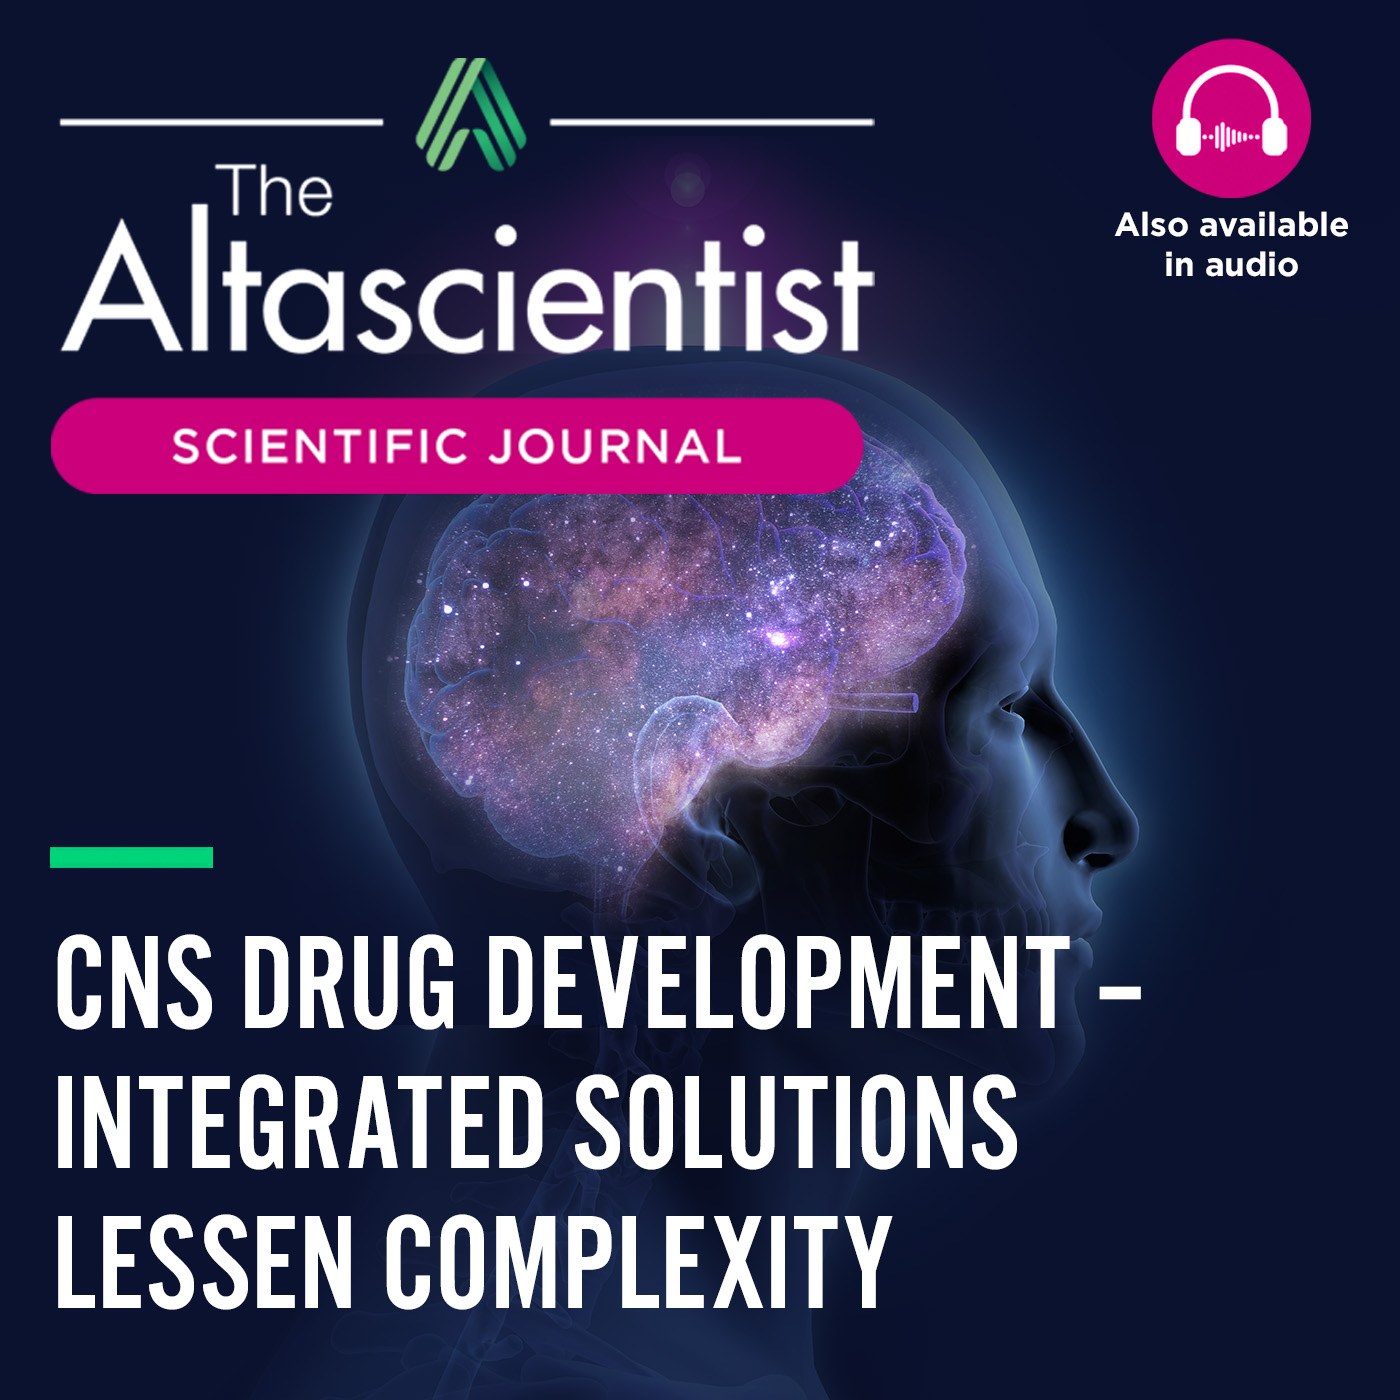 The Altascientist: Issue 33 - CNS DRUG DEVELOPMENT SOLUTIONS